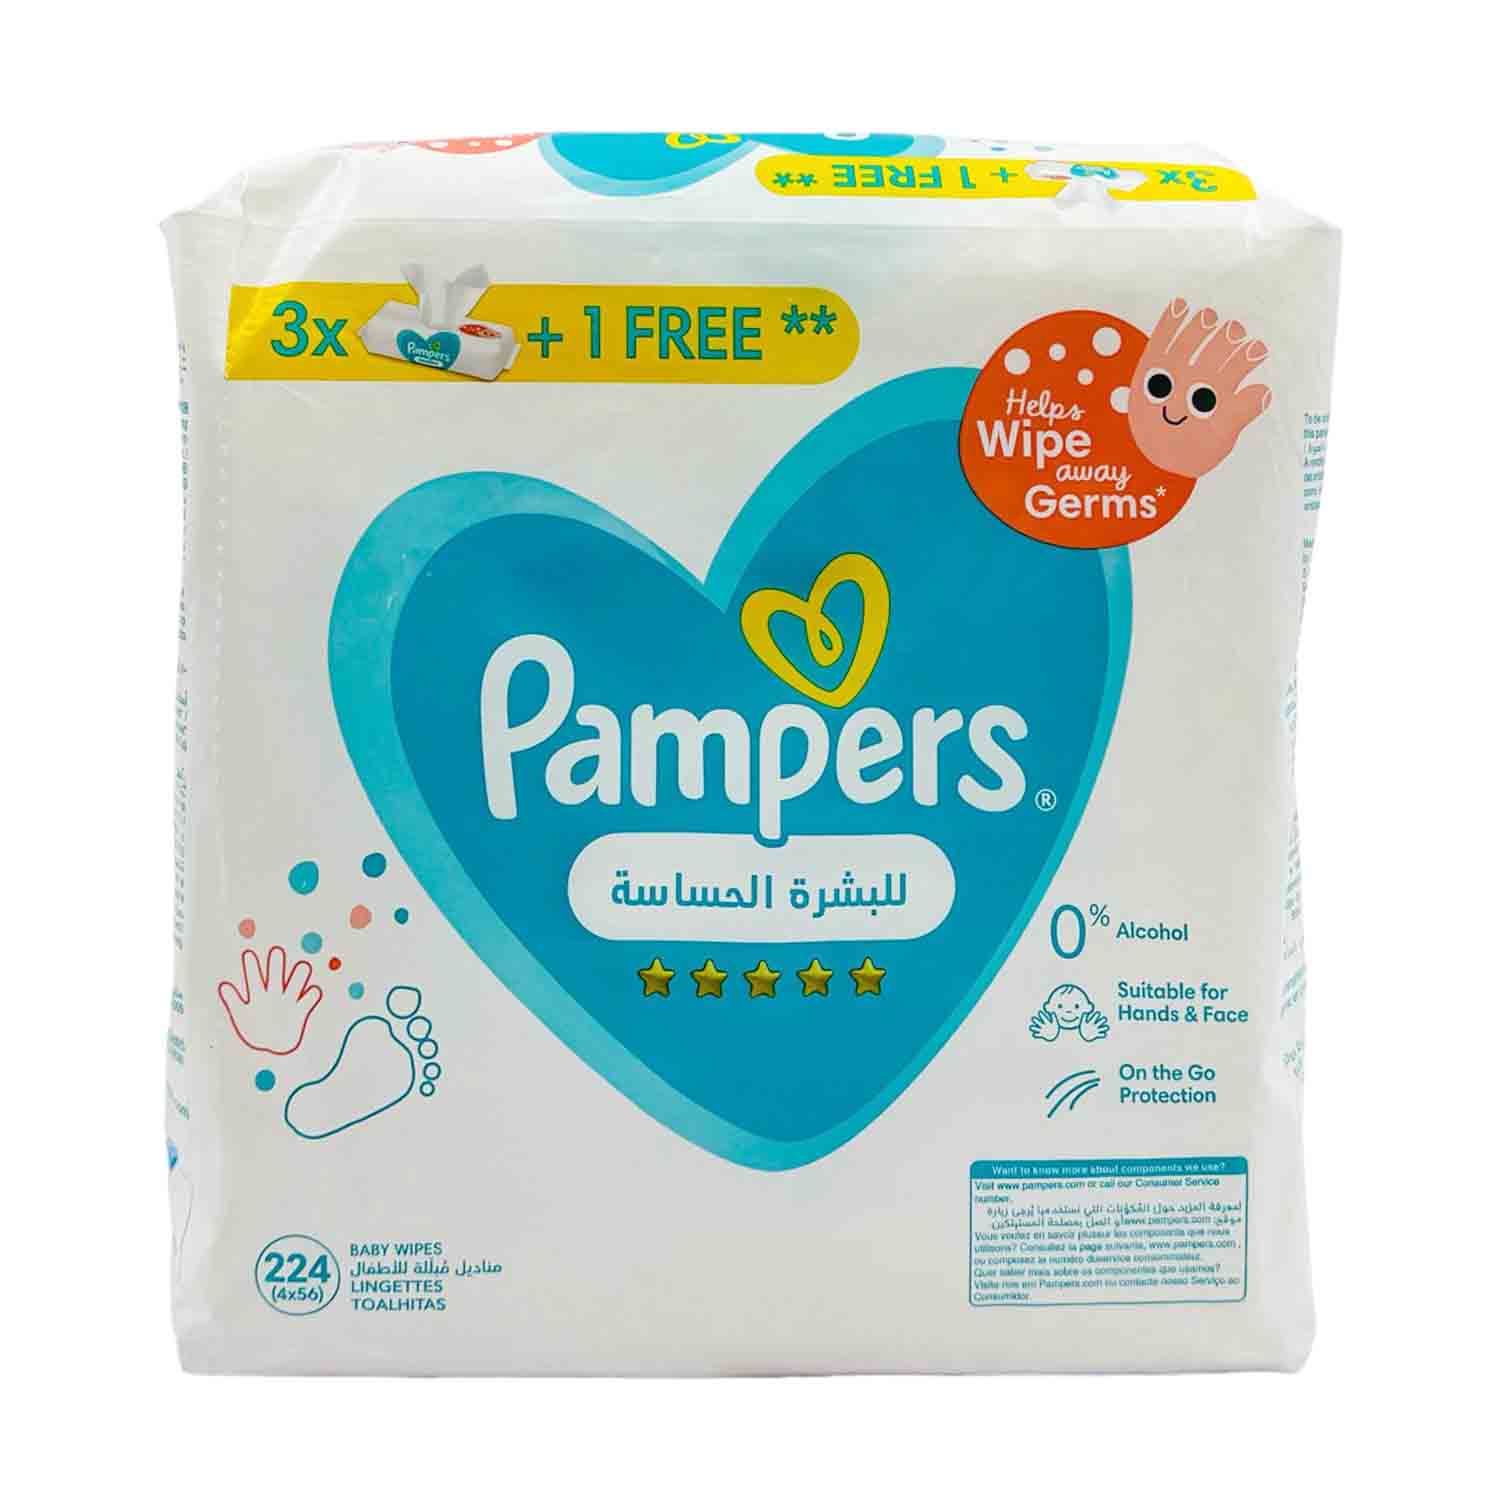 PAMPERS Lingettes Active X60 - Cdiscount